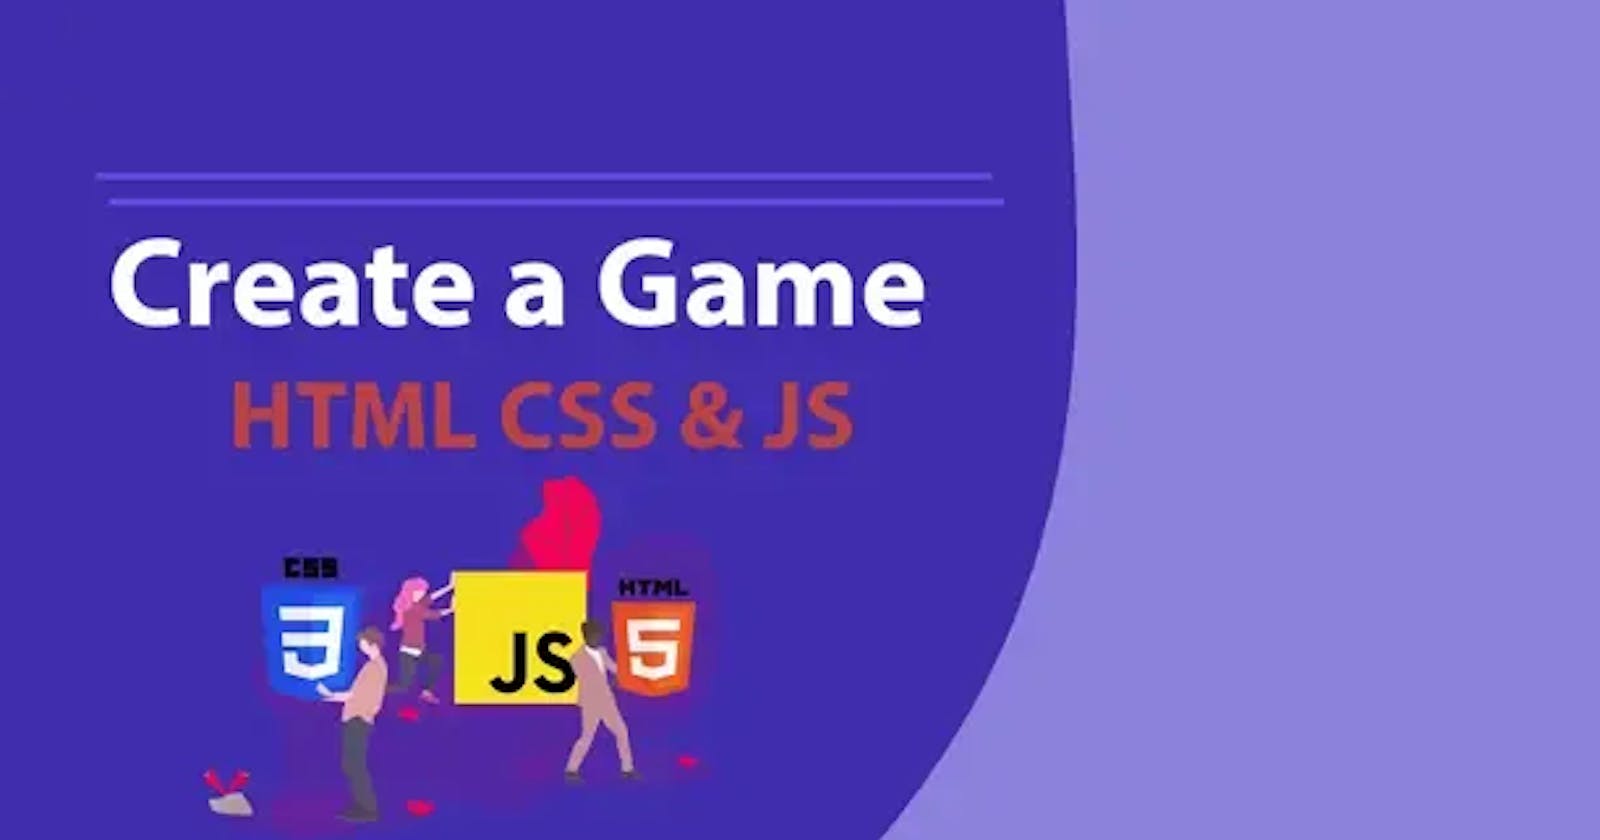 How to Make a Game Using HTML CSS and JavaScript